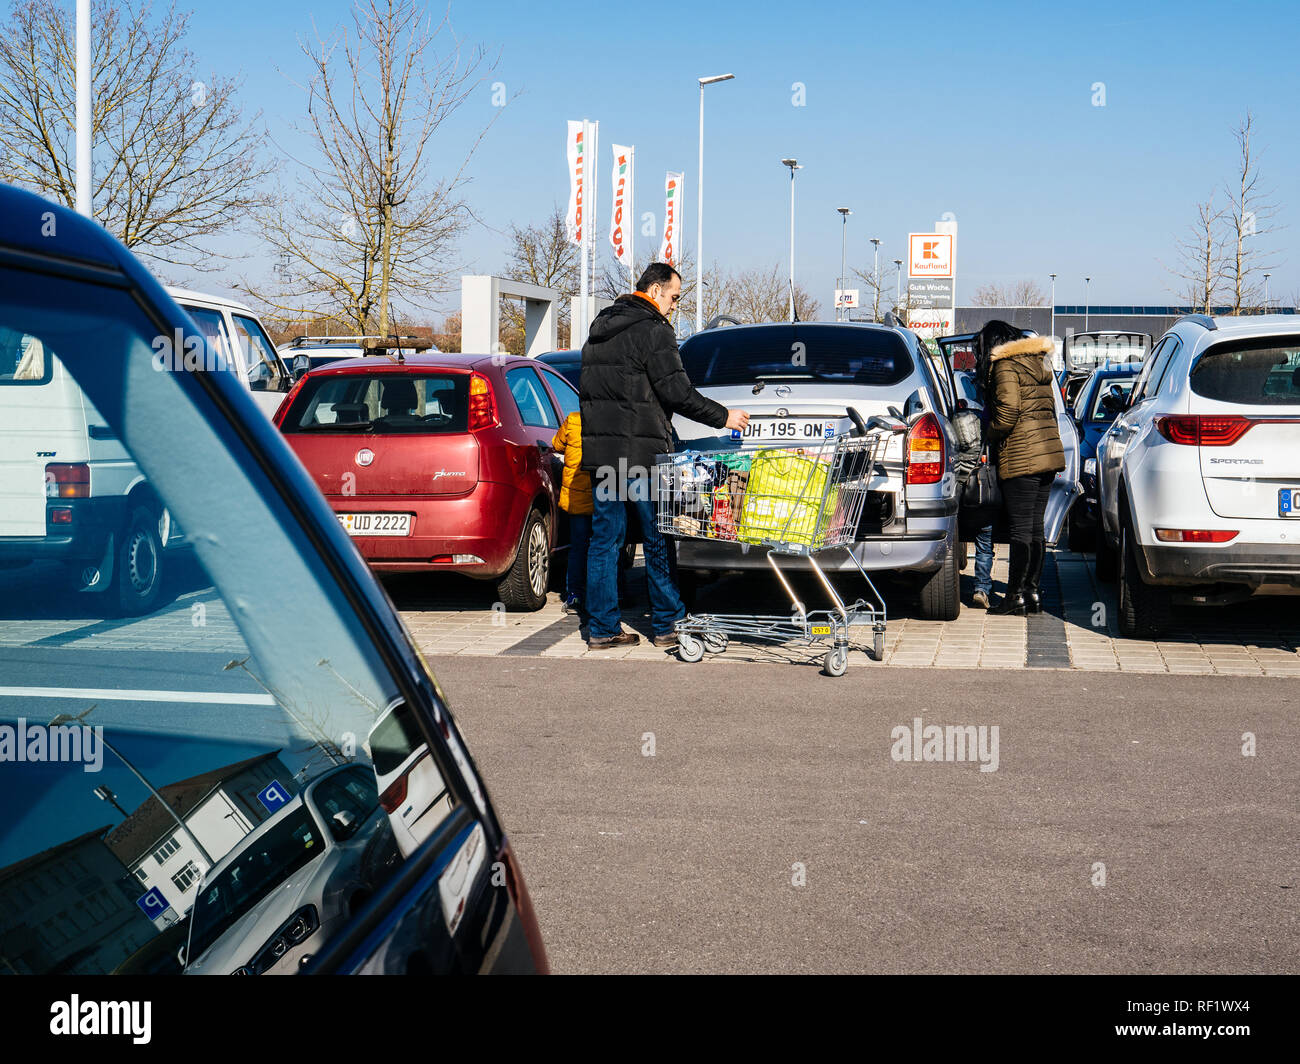 KARLSRUHE, GERMANY - FEB 24, 2018: Middle Eastern ethnicity family couple loading groceries in Kaufland supermarket food parking  Stock Photo